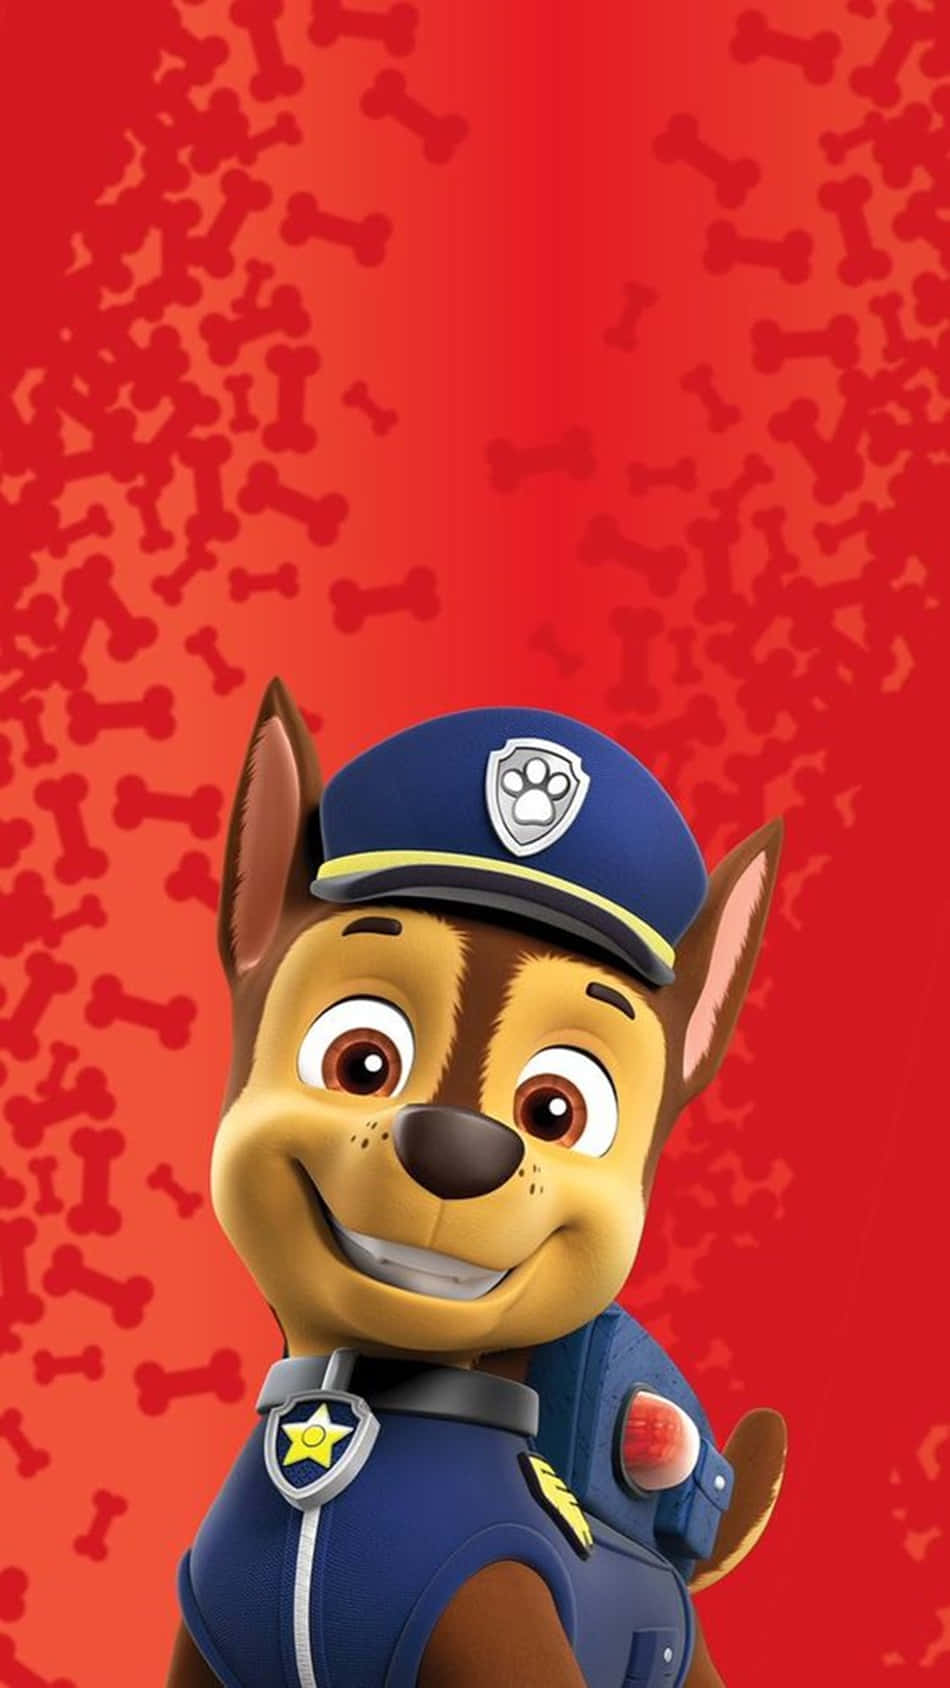 Chase the brave pup from Paw Patrol Wallpaper